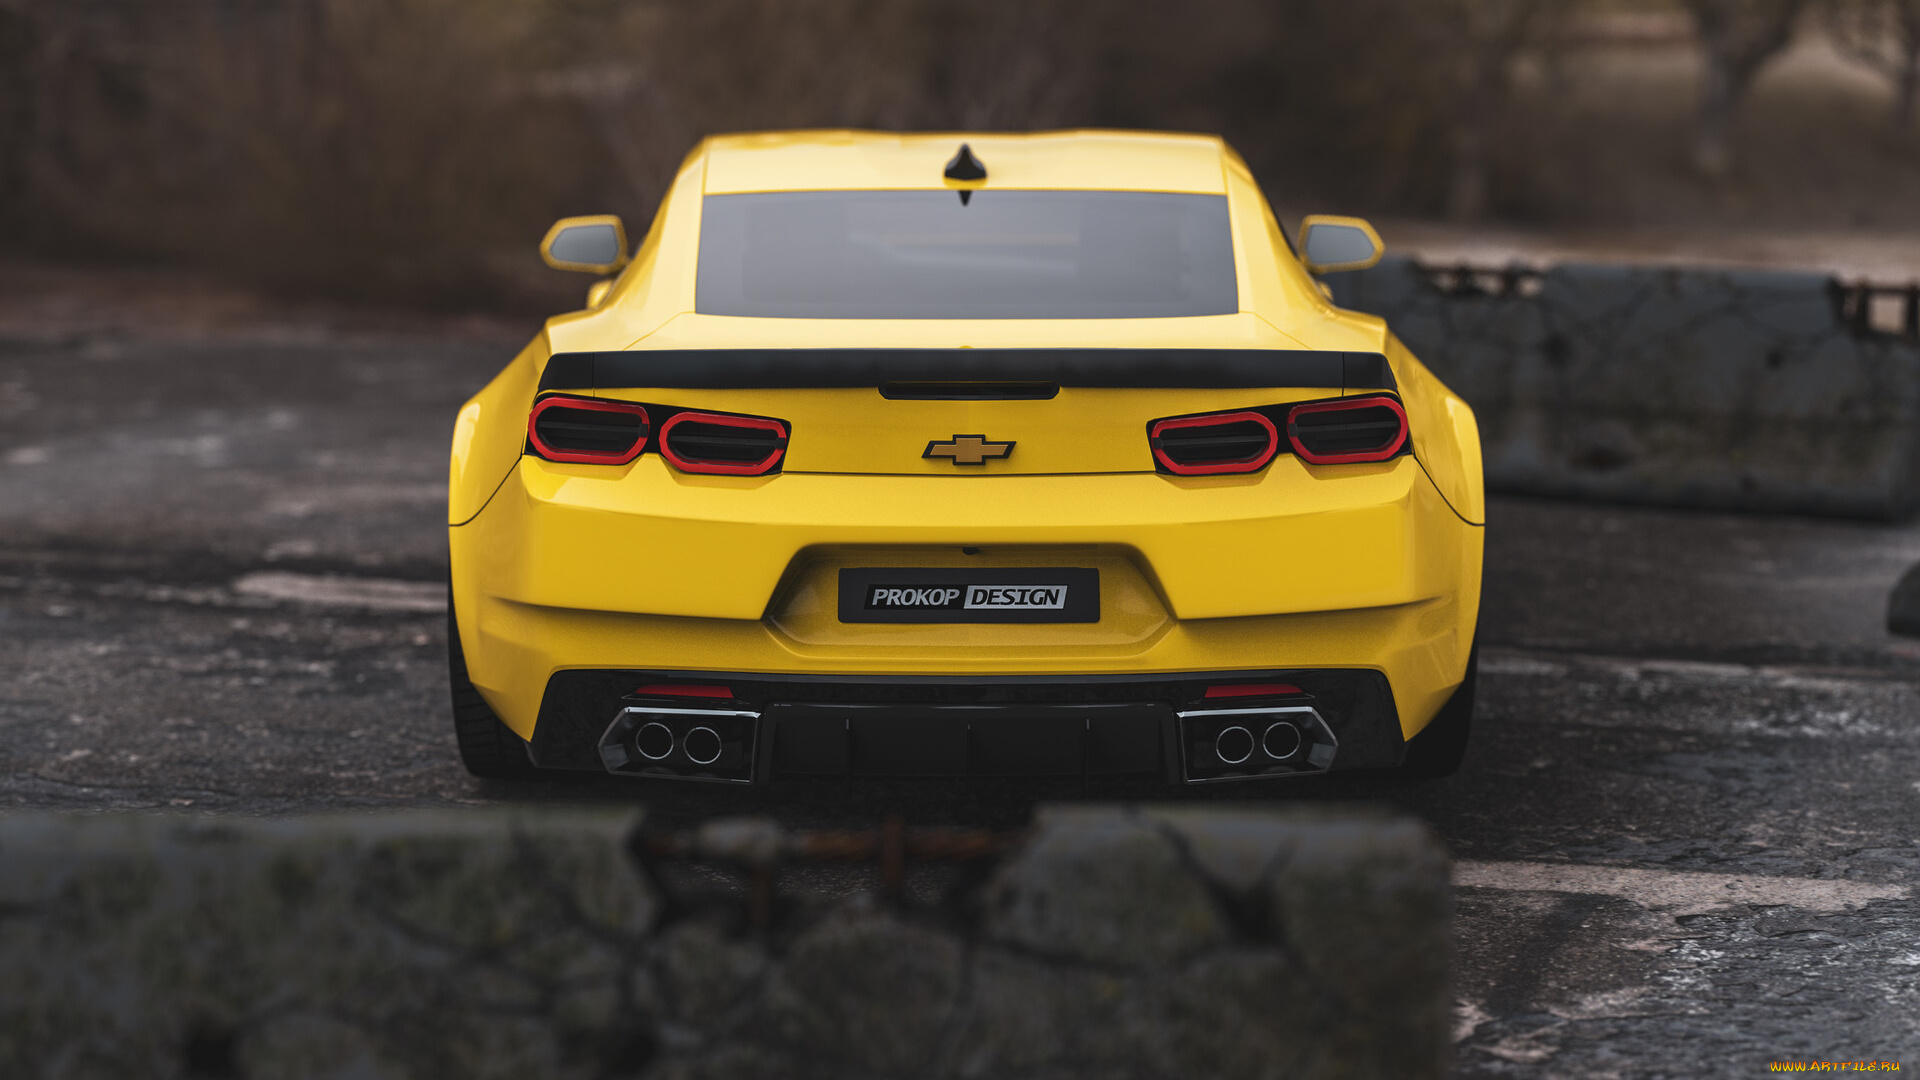 chevrolet, camaro, rs, bumble, bee, new, vision, автомобили, 3д, chevrolet, camaro, rs, bumble, bee, new, vision